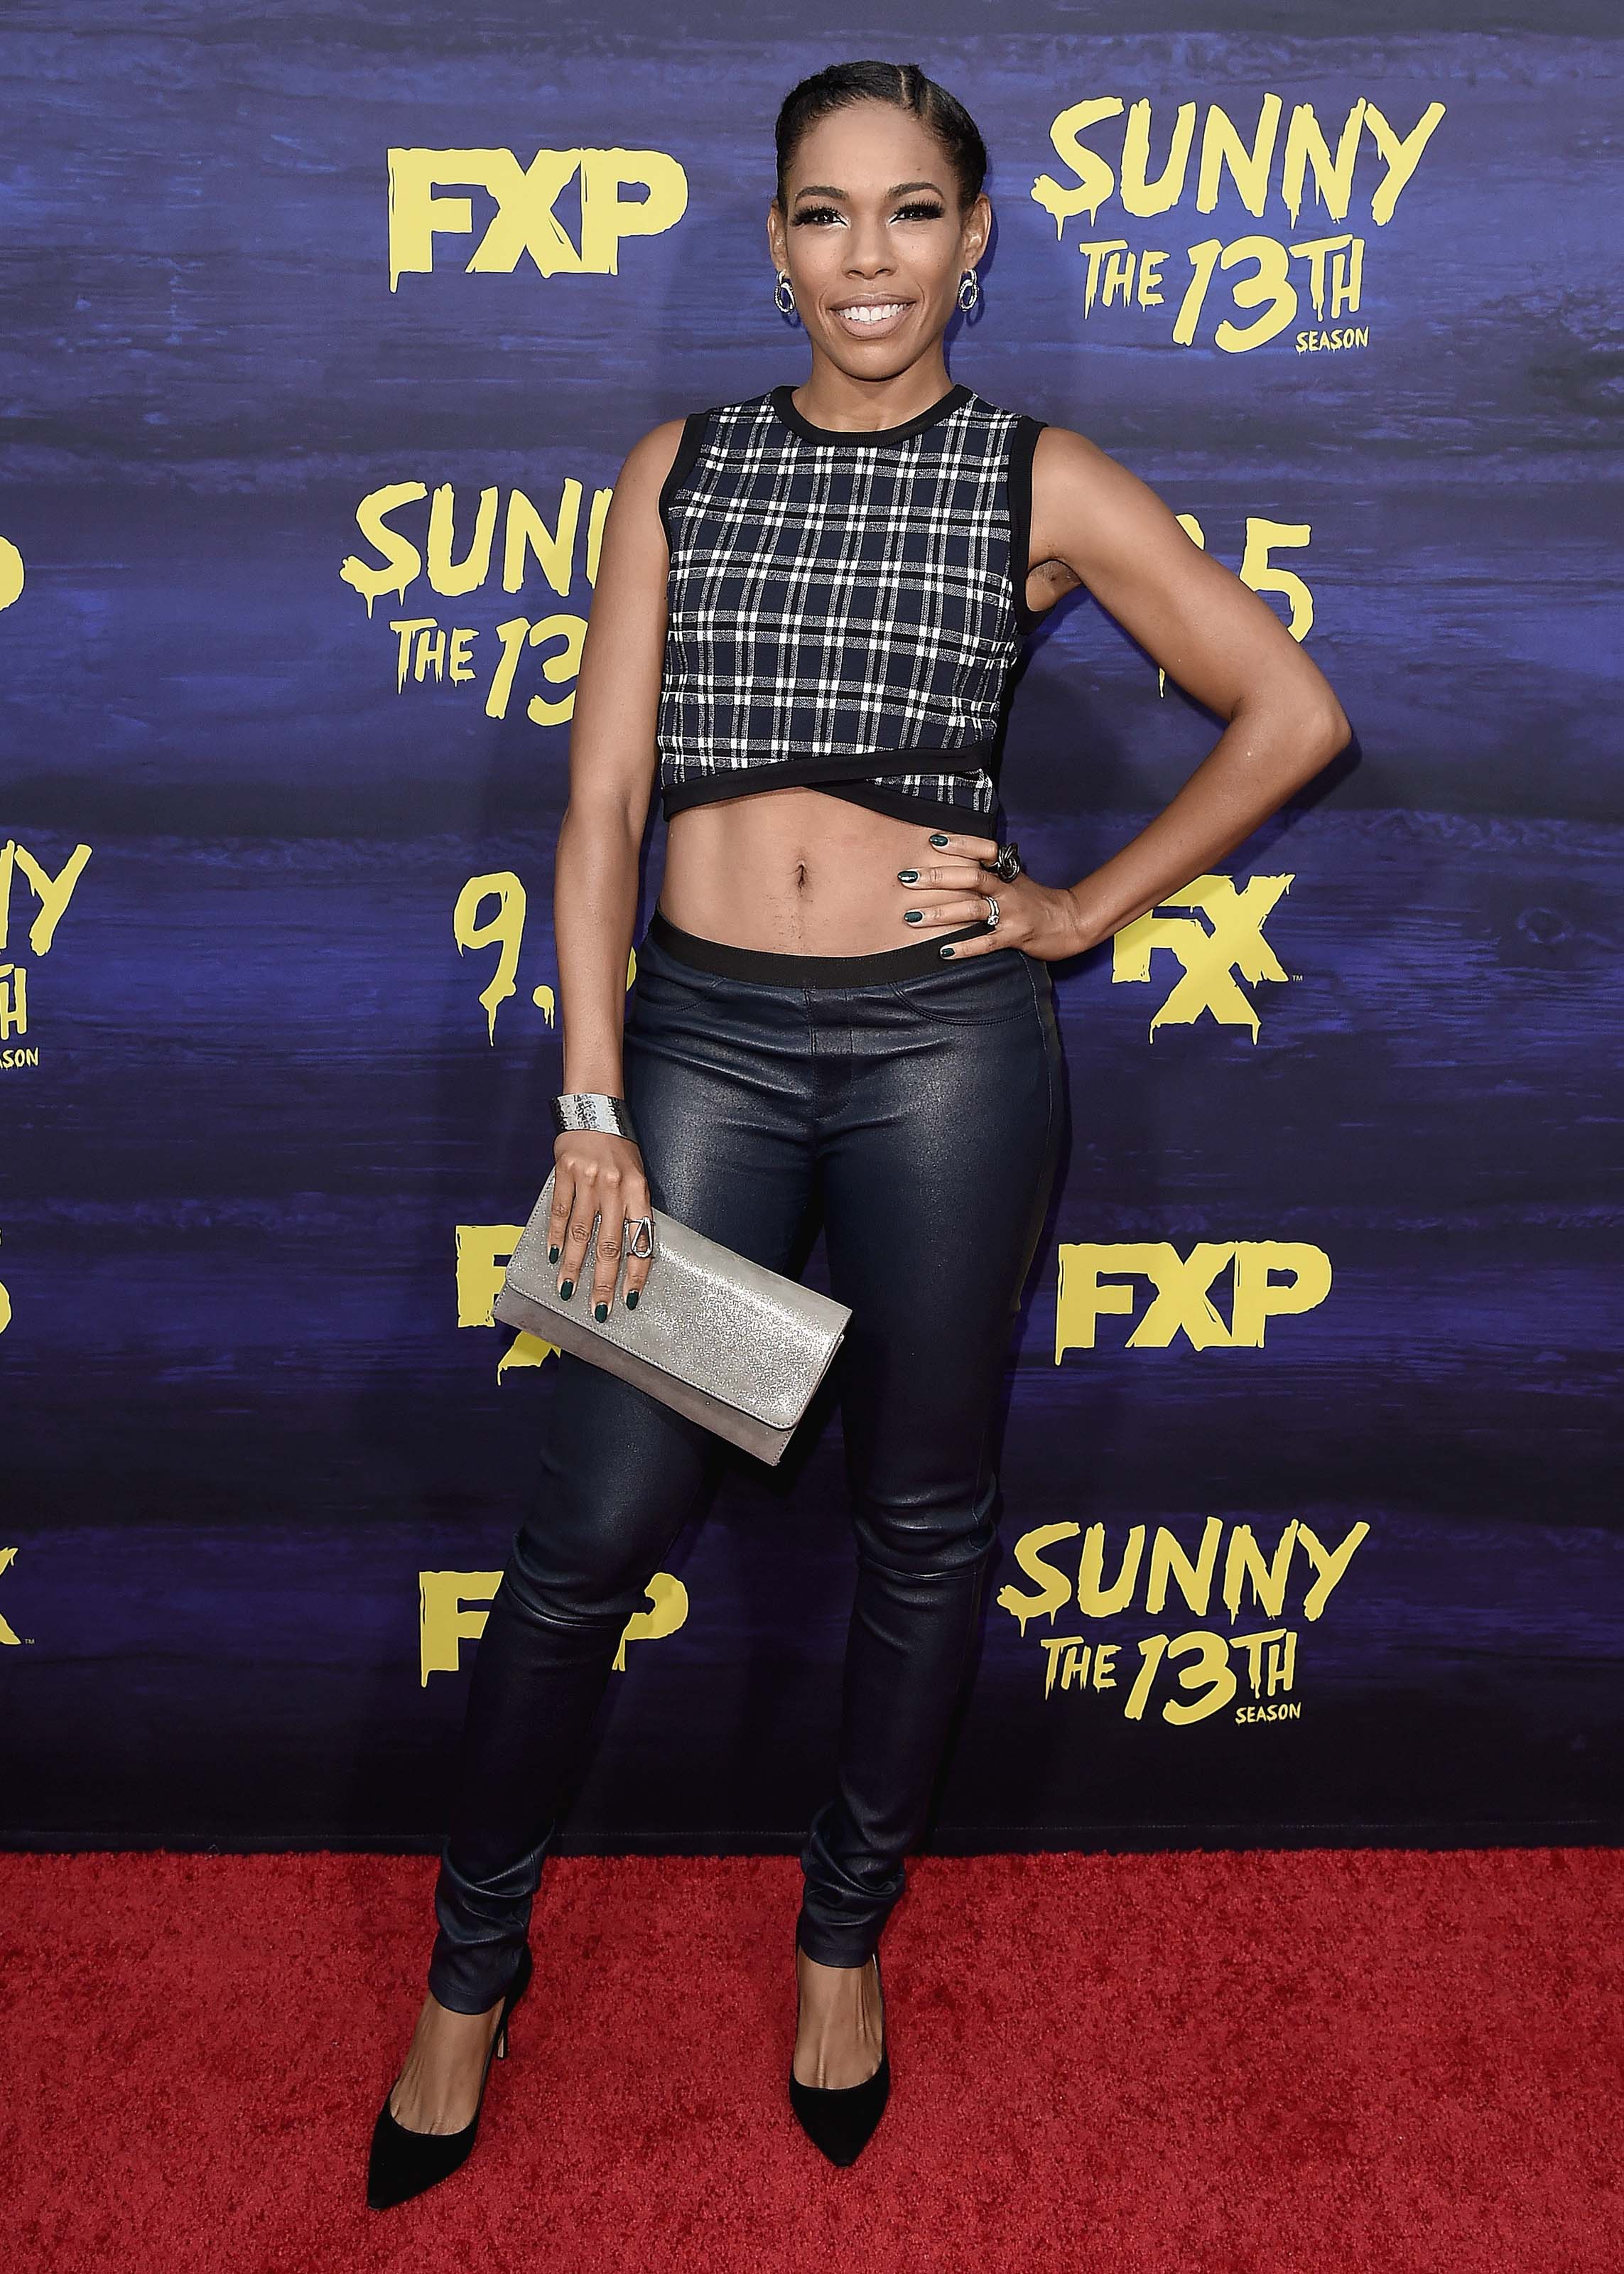 Angela Lewis attends Its Always Sunny in Philadelphia TV show premiere